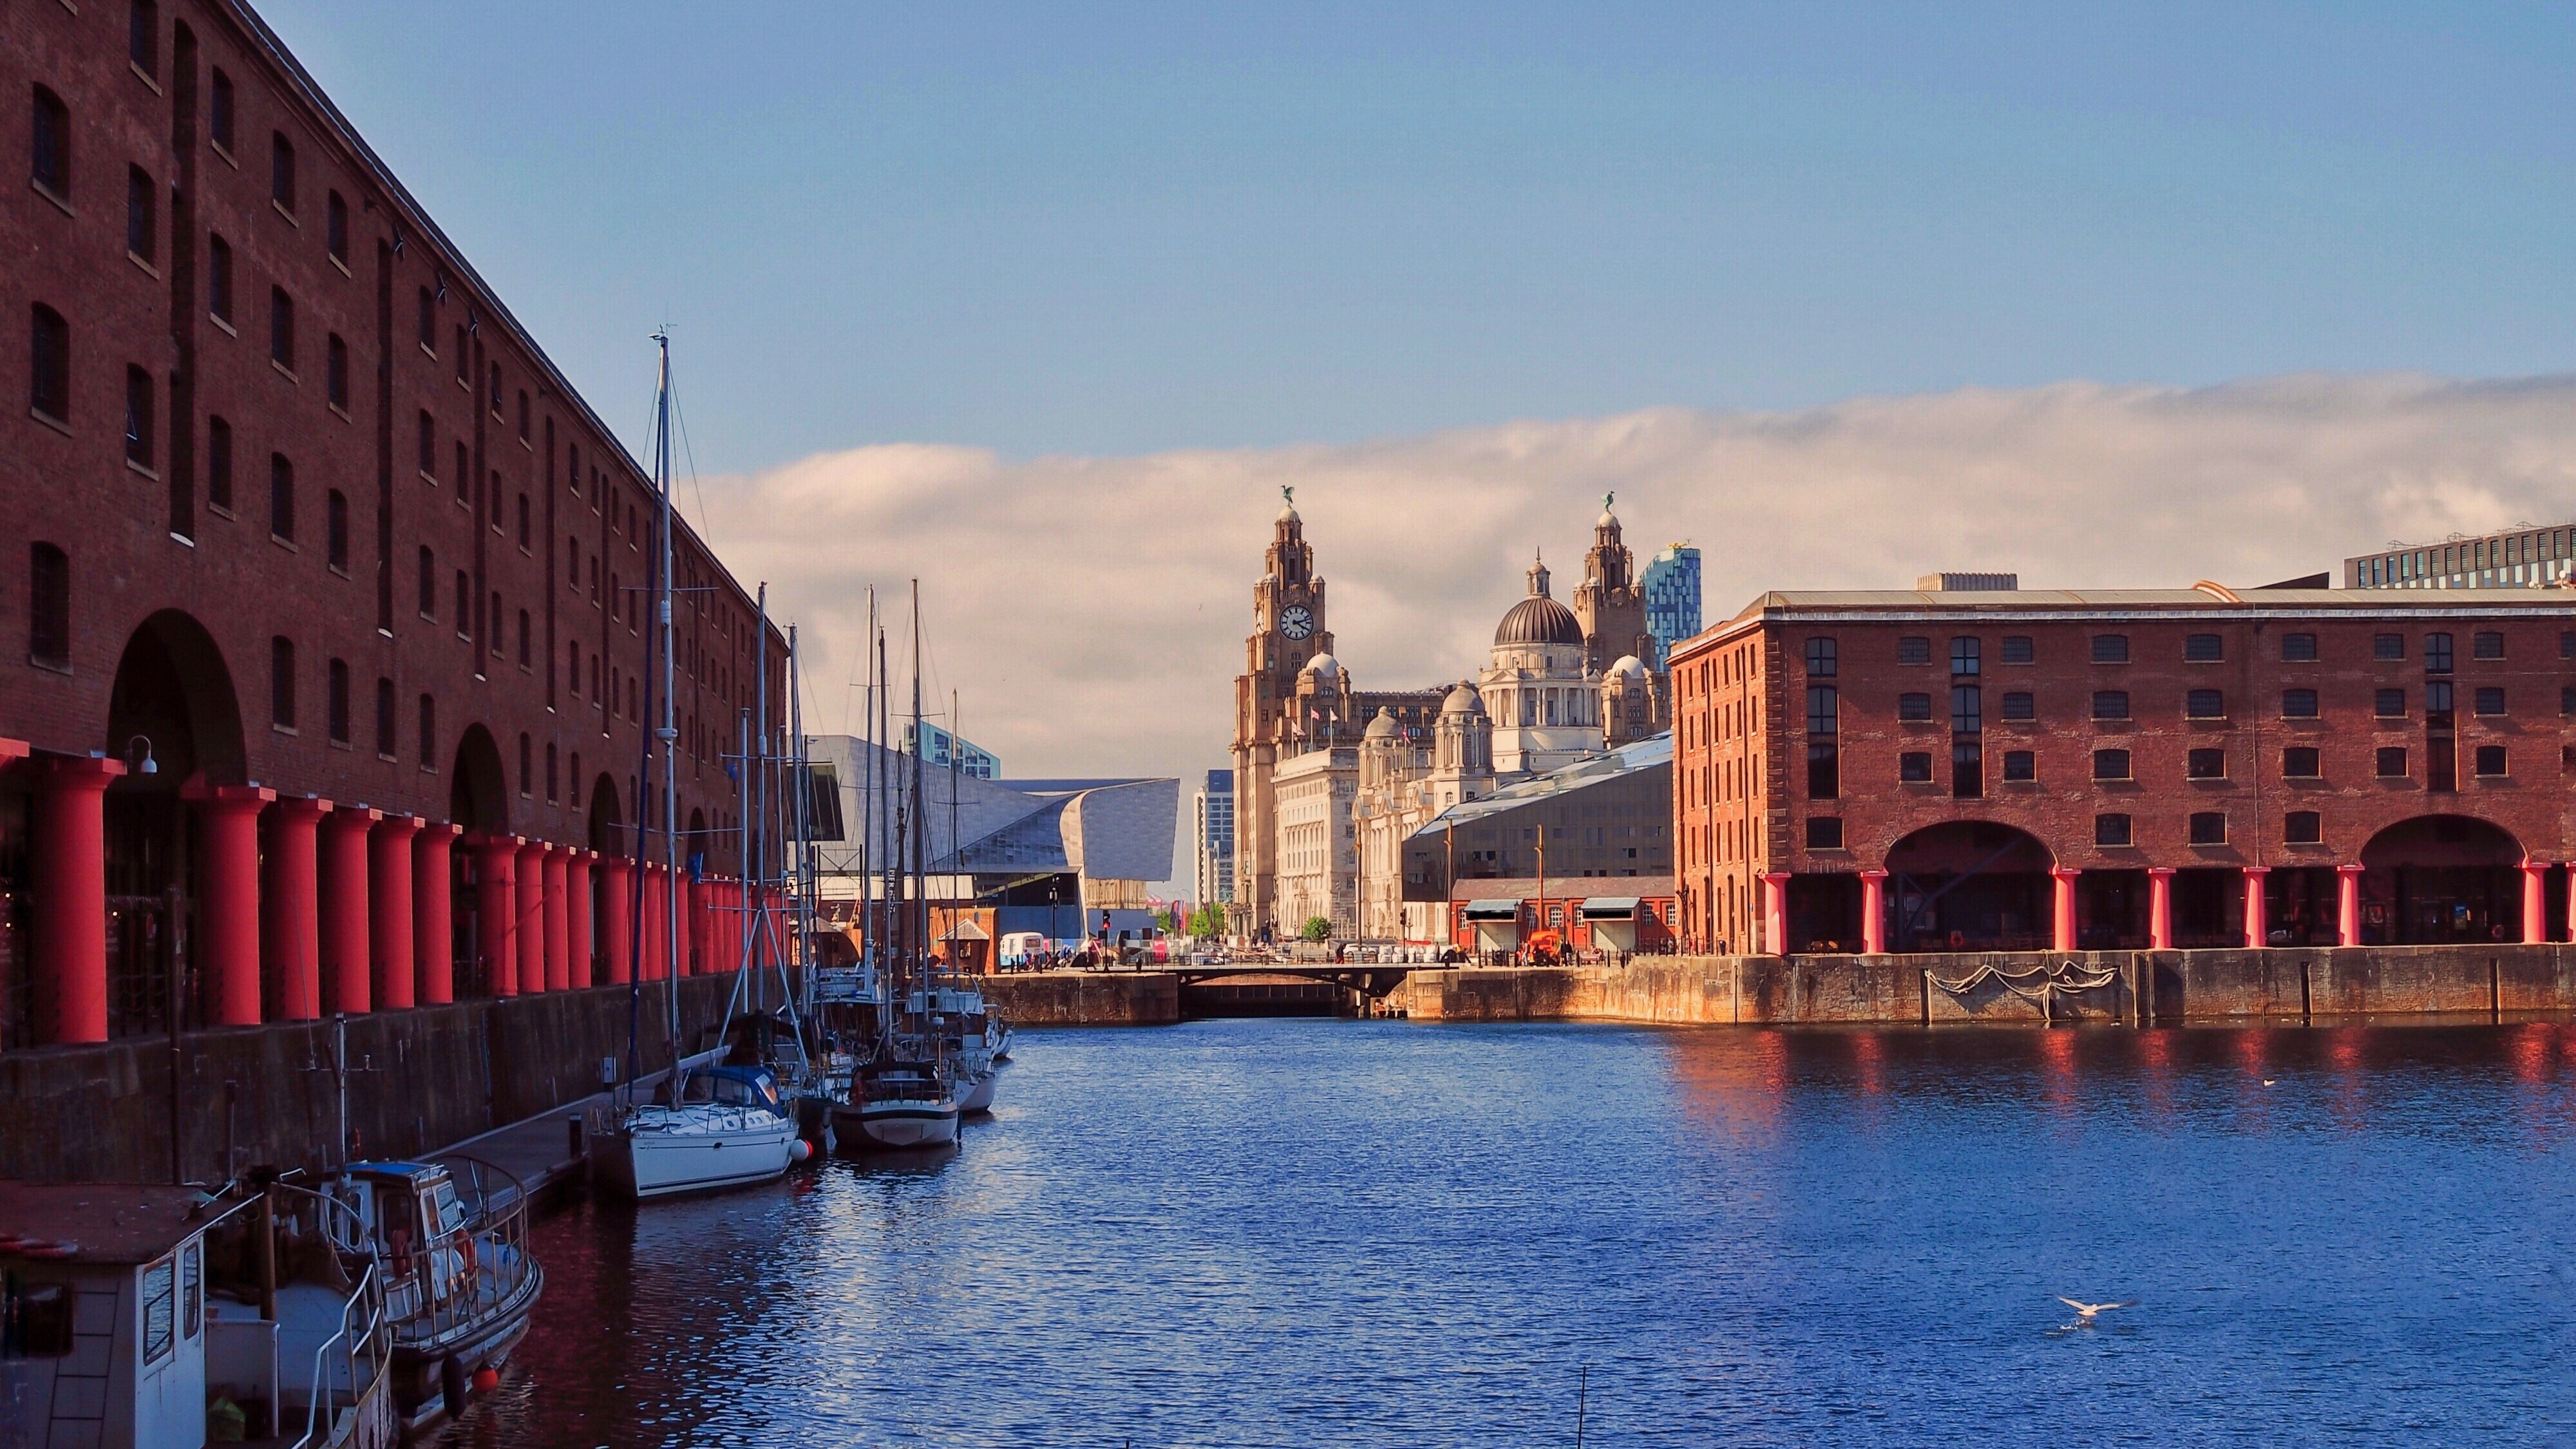 Liverpool operators fear wipeout in face of partial lockdown